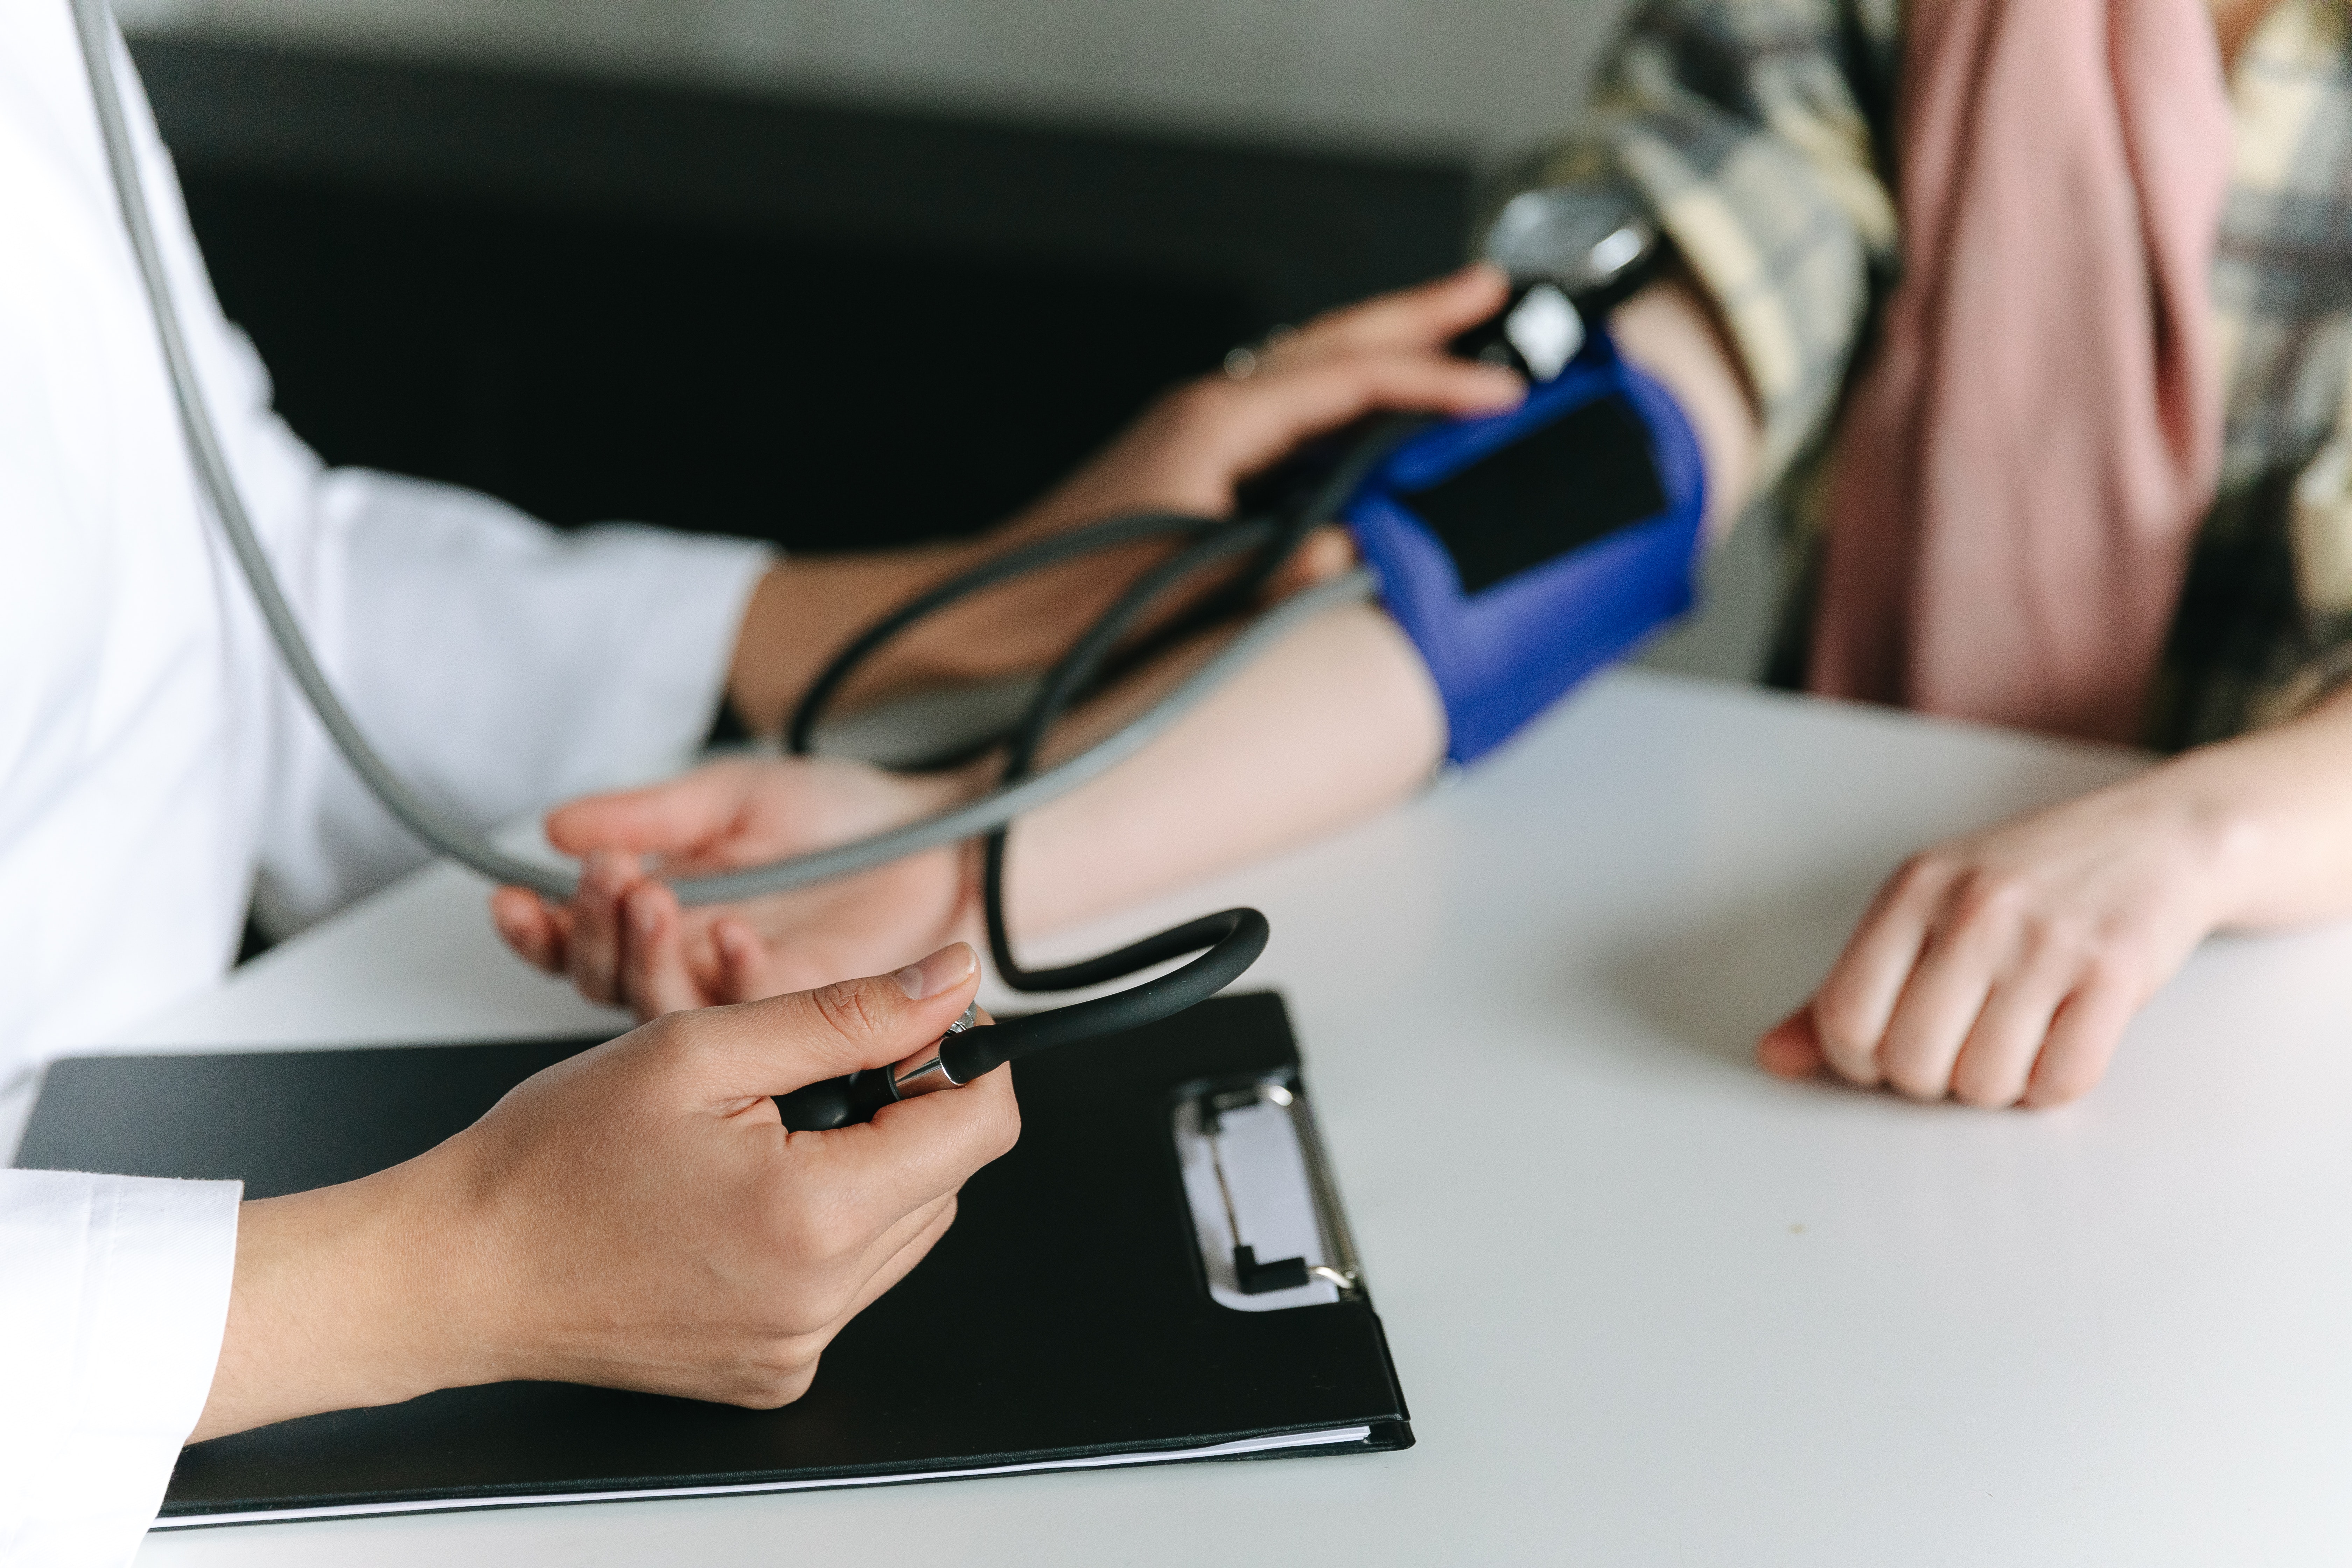 A doctor checks blood pressure for a patient with a chronic condition. This action can also be performed via telehealth.